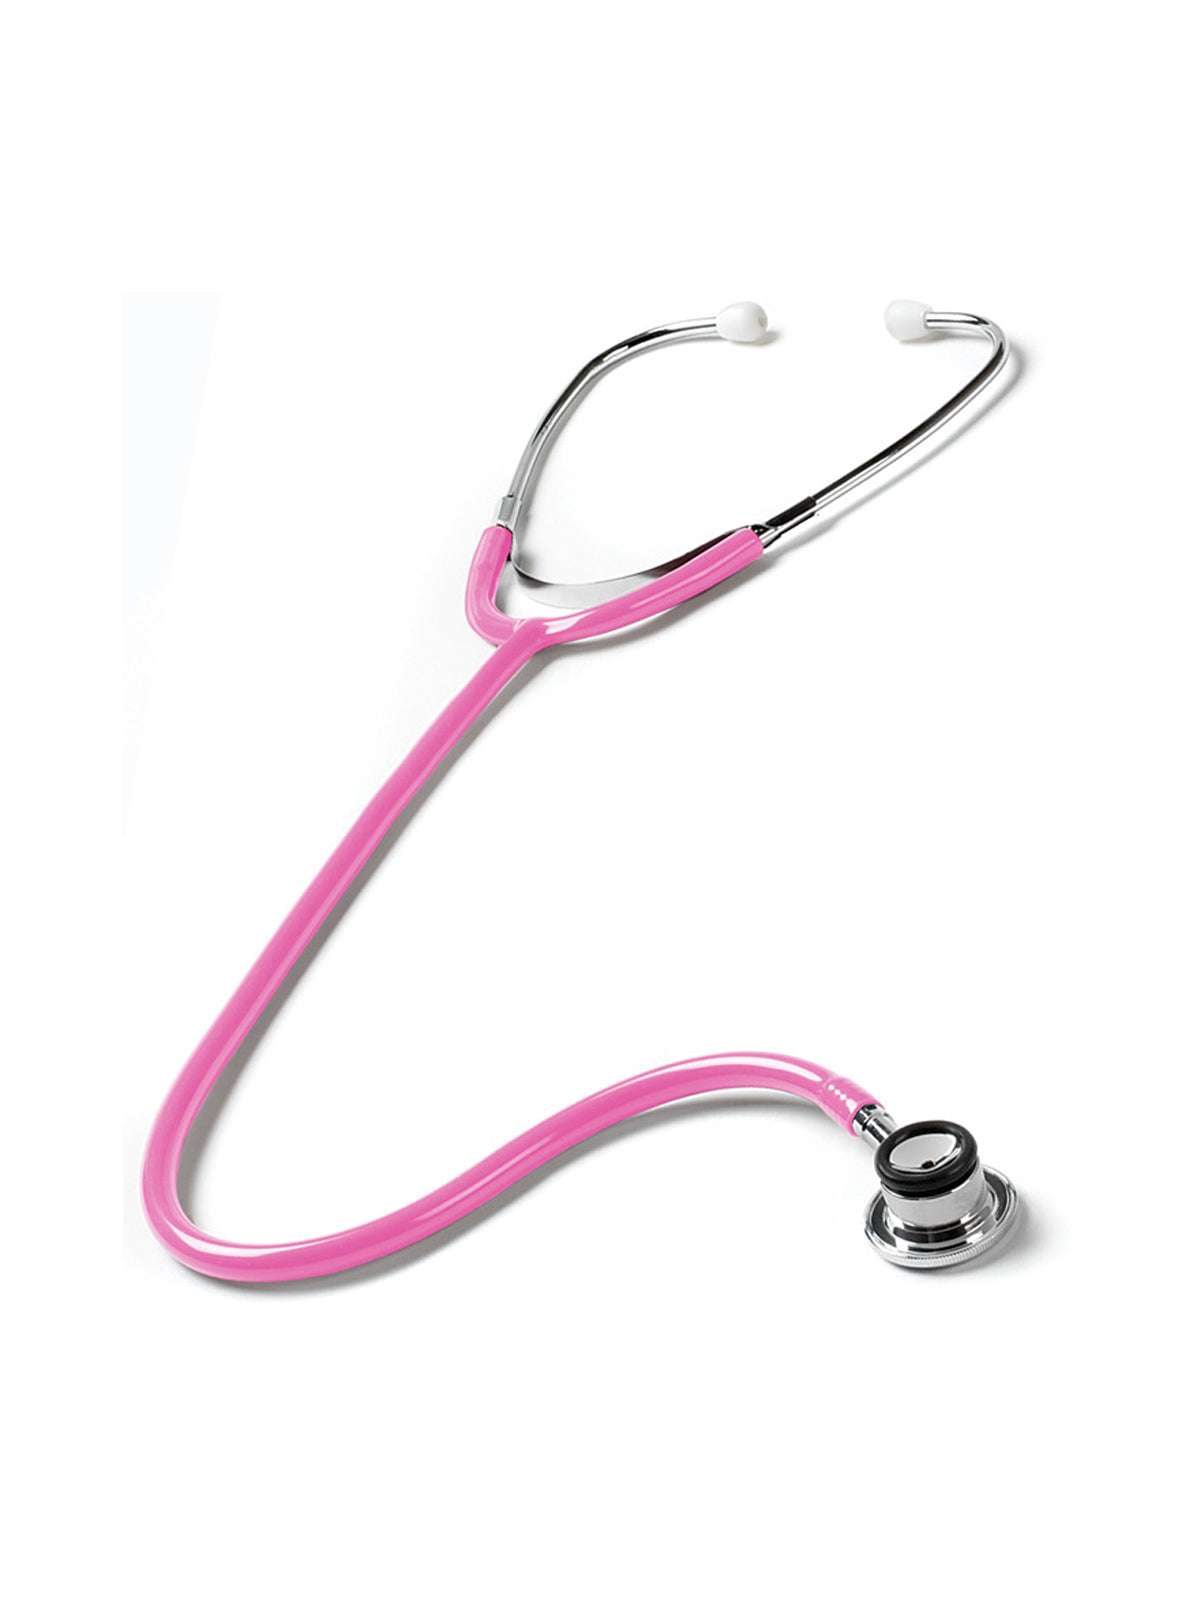 Dual Head Stethoscopes - Infant Edition - S108I - Hot Pink